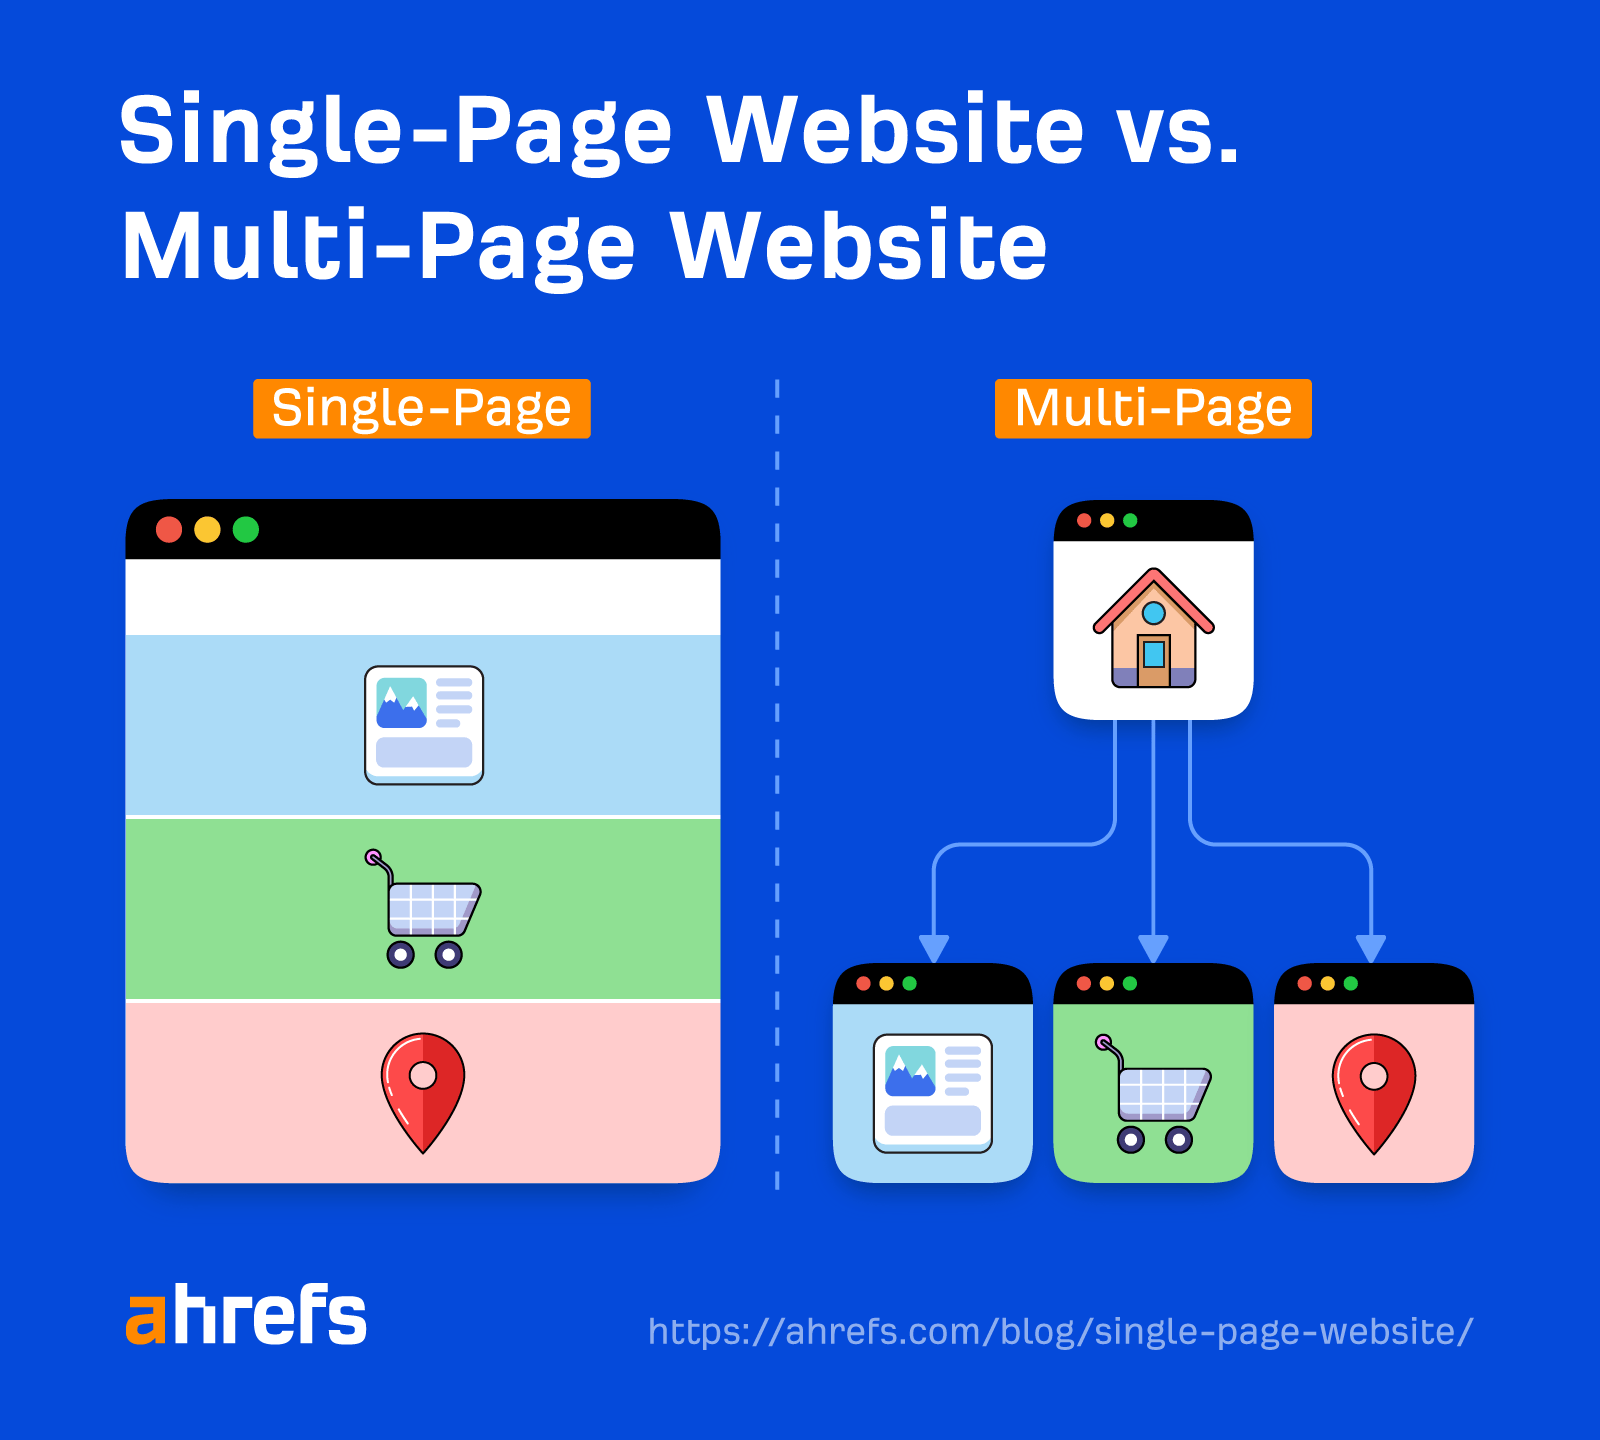 Structure comparison between single-page and multi-page websites
